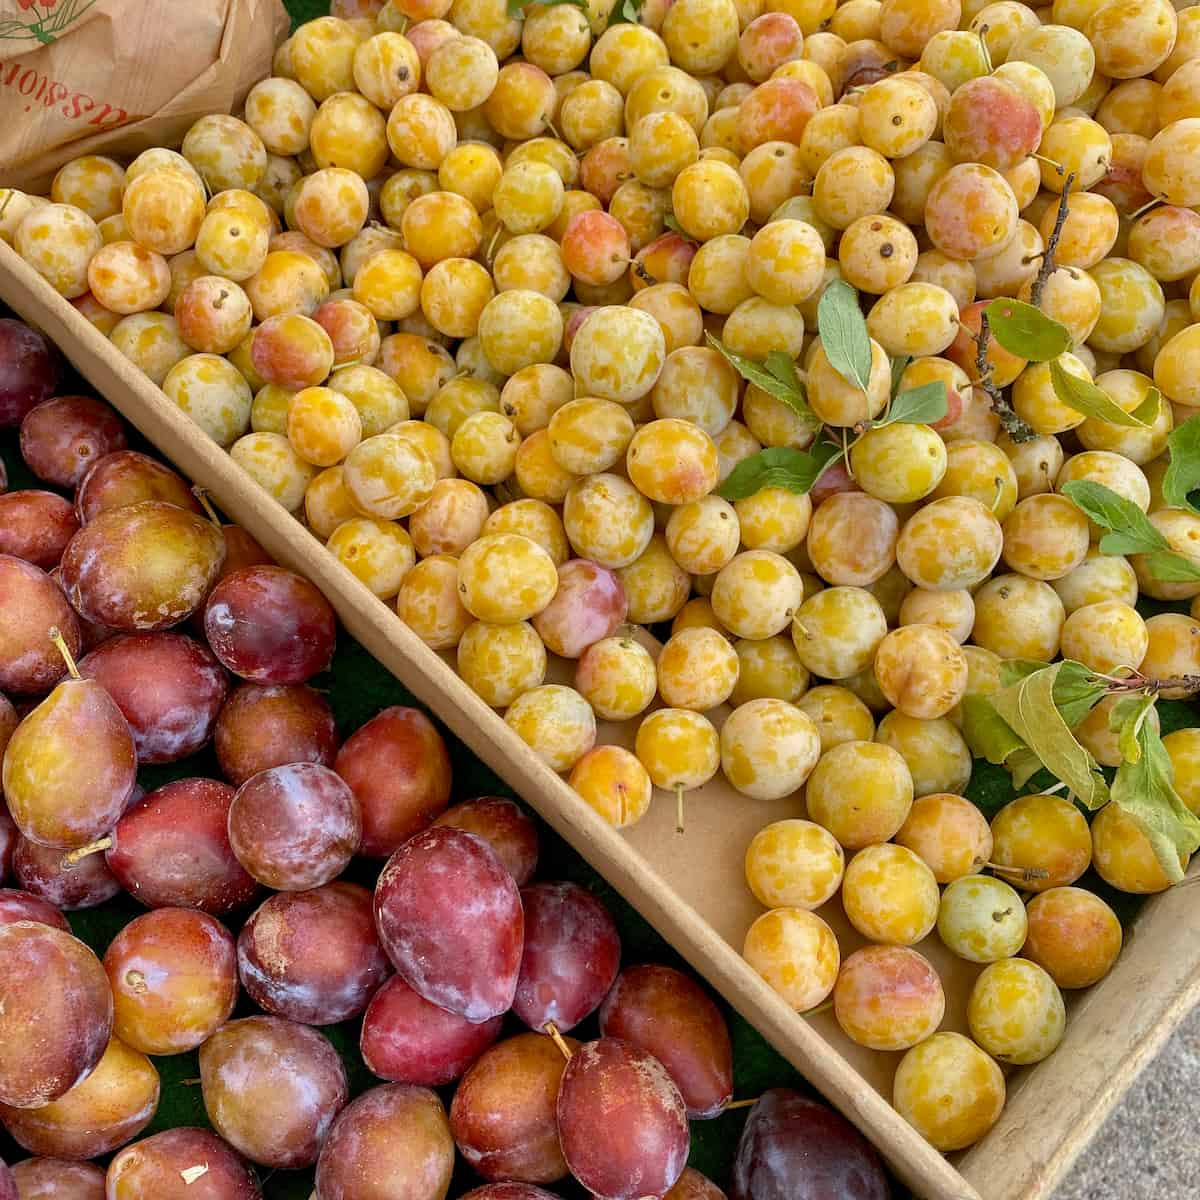 boxes of mini yellow plums known as Mirabelles in France, next to Ente plums